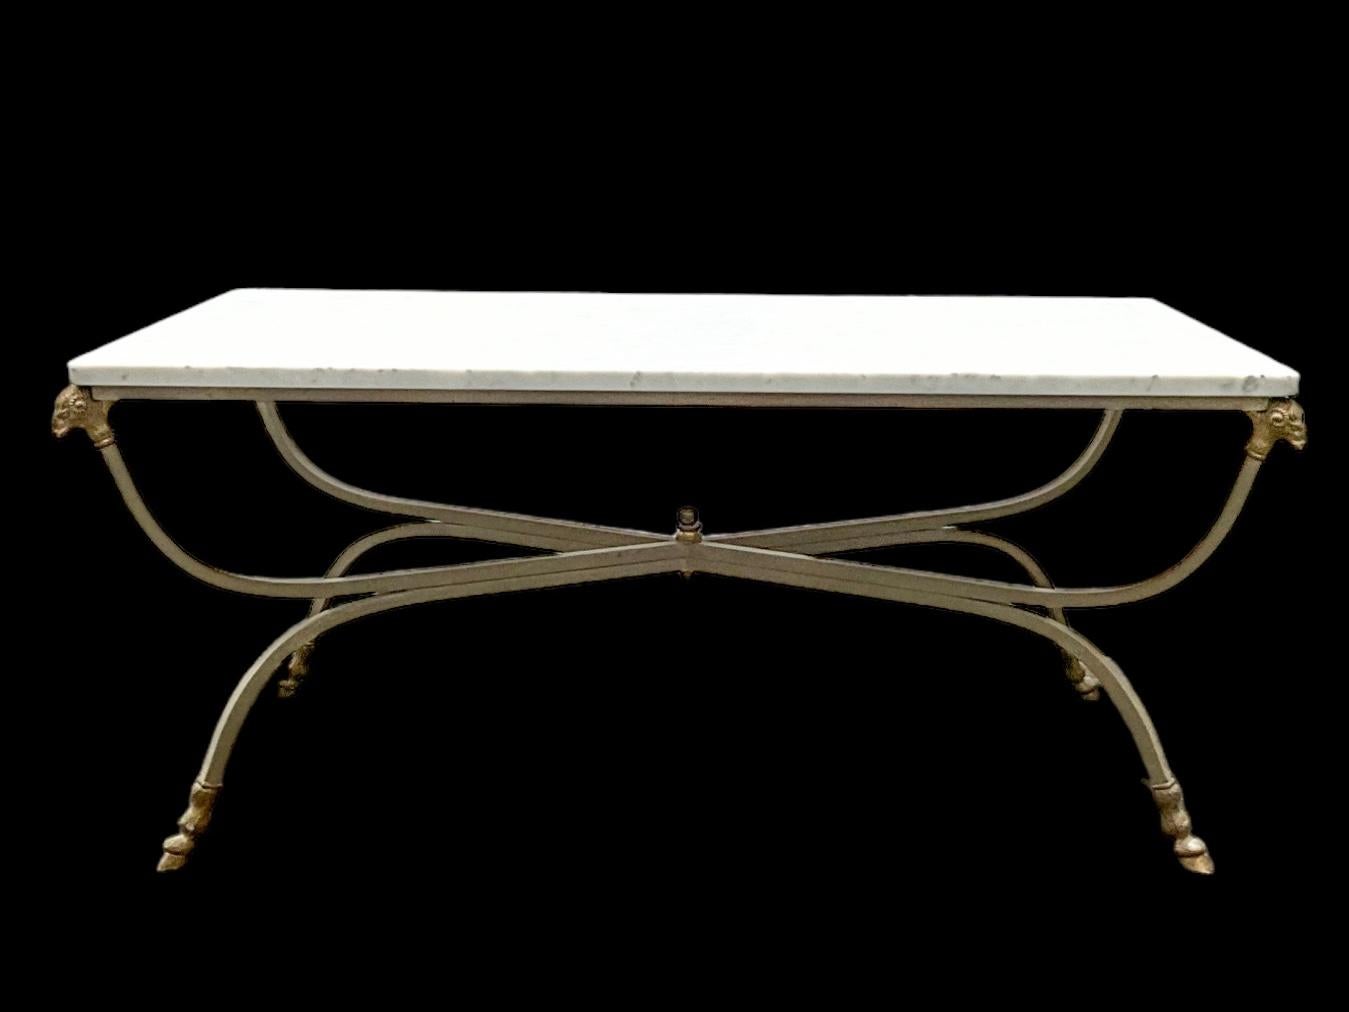 20th Century Maison Jansen Inspired Neo-Classical Steel & Bronze Marble Top Coffee Table  For Sale